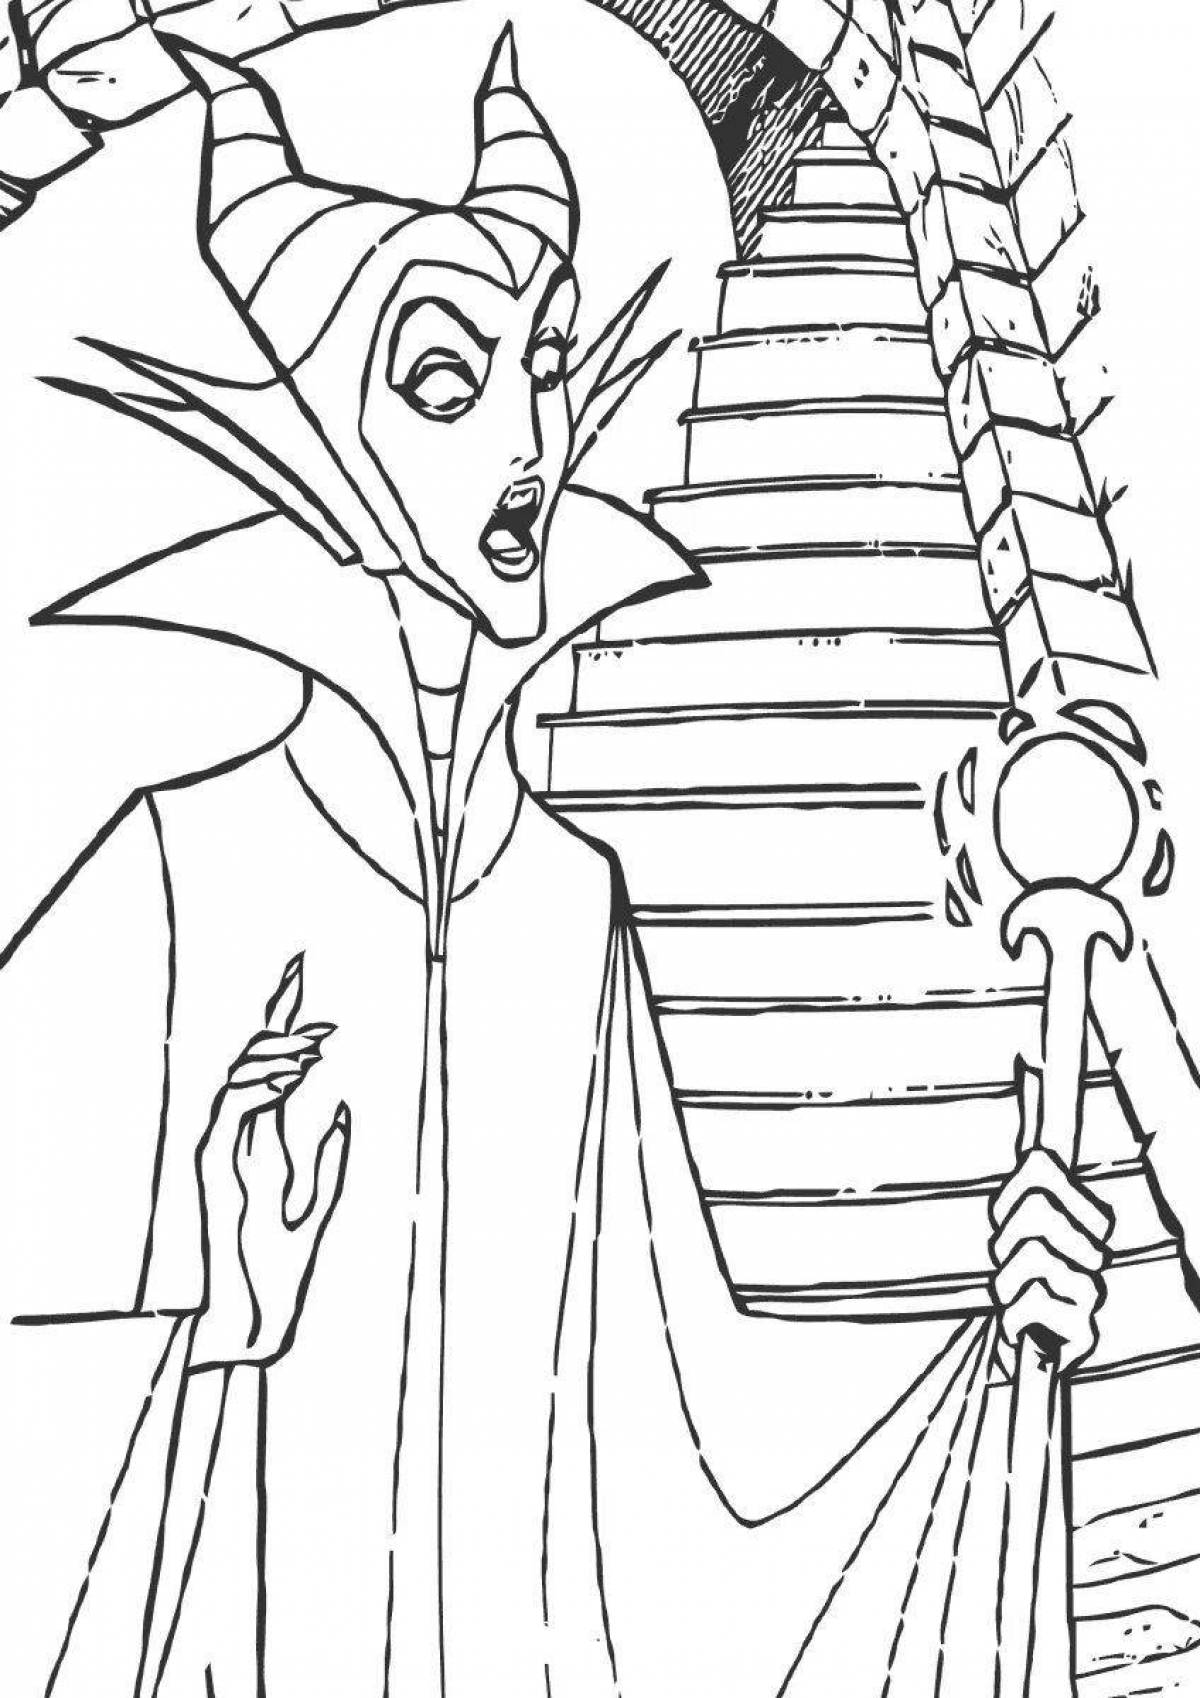 Great maleficent coloring book for kids